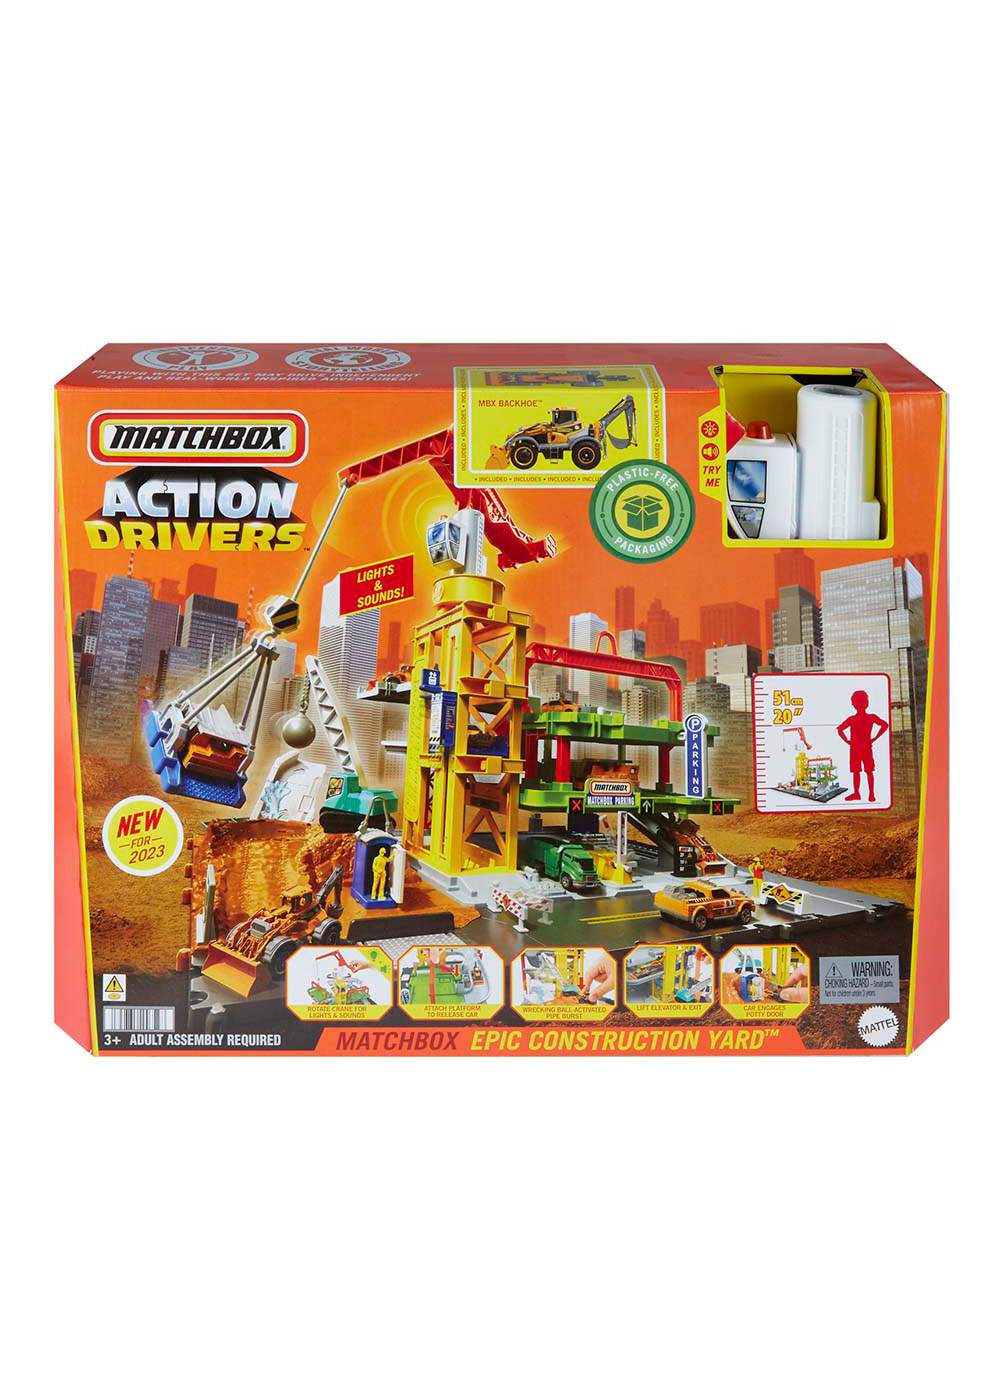 Matchbox Action Drivers Epic Construction Yard Playset; image 1 of 3